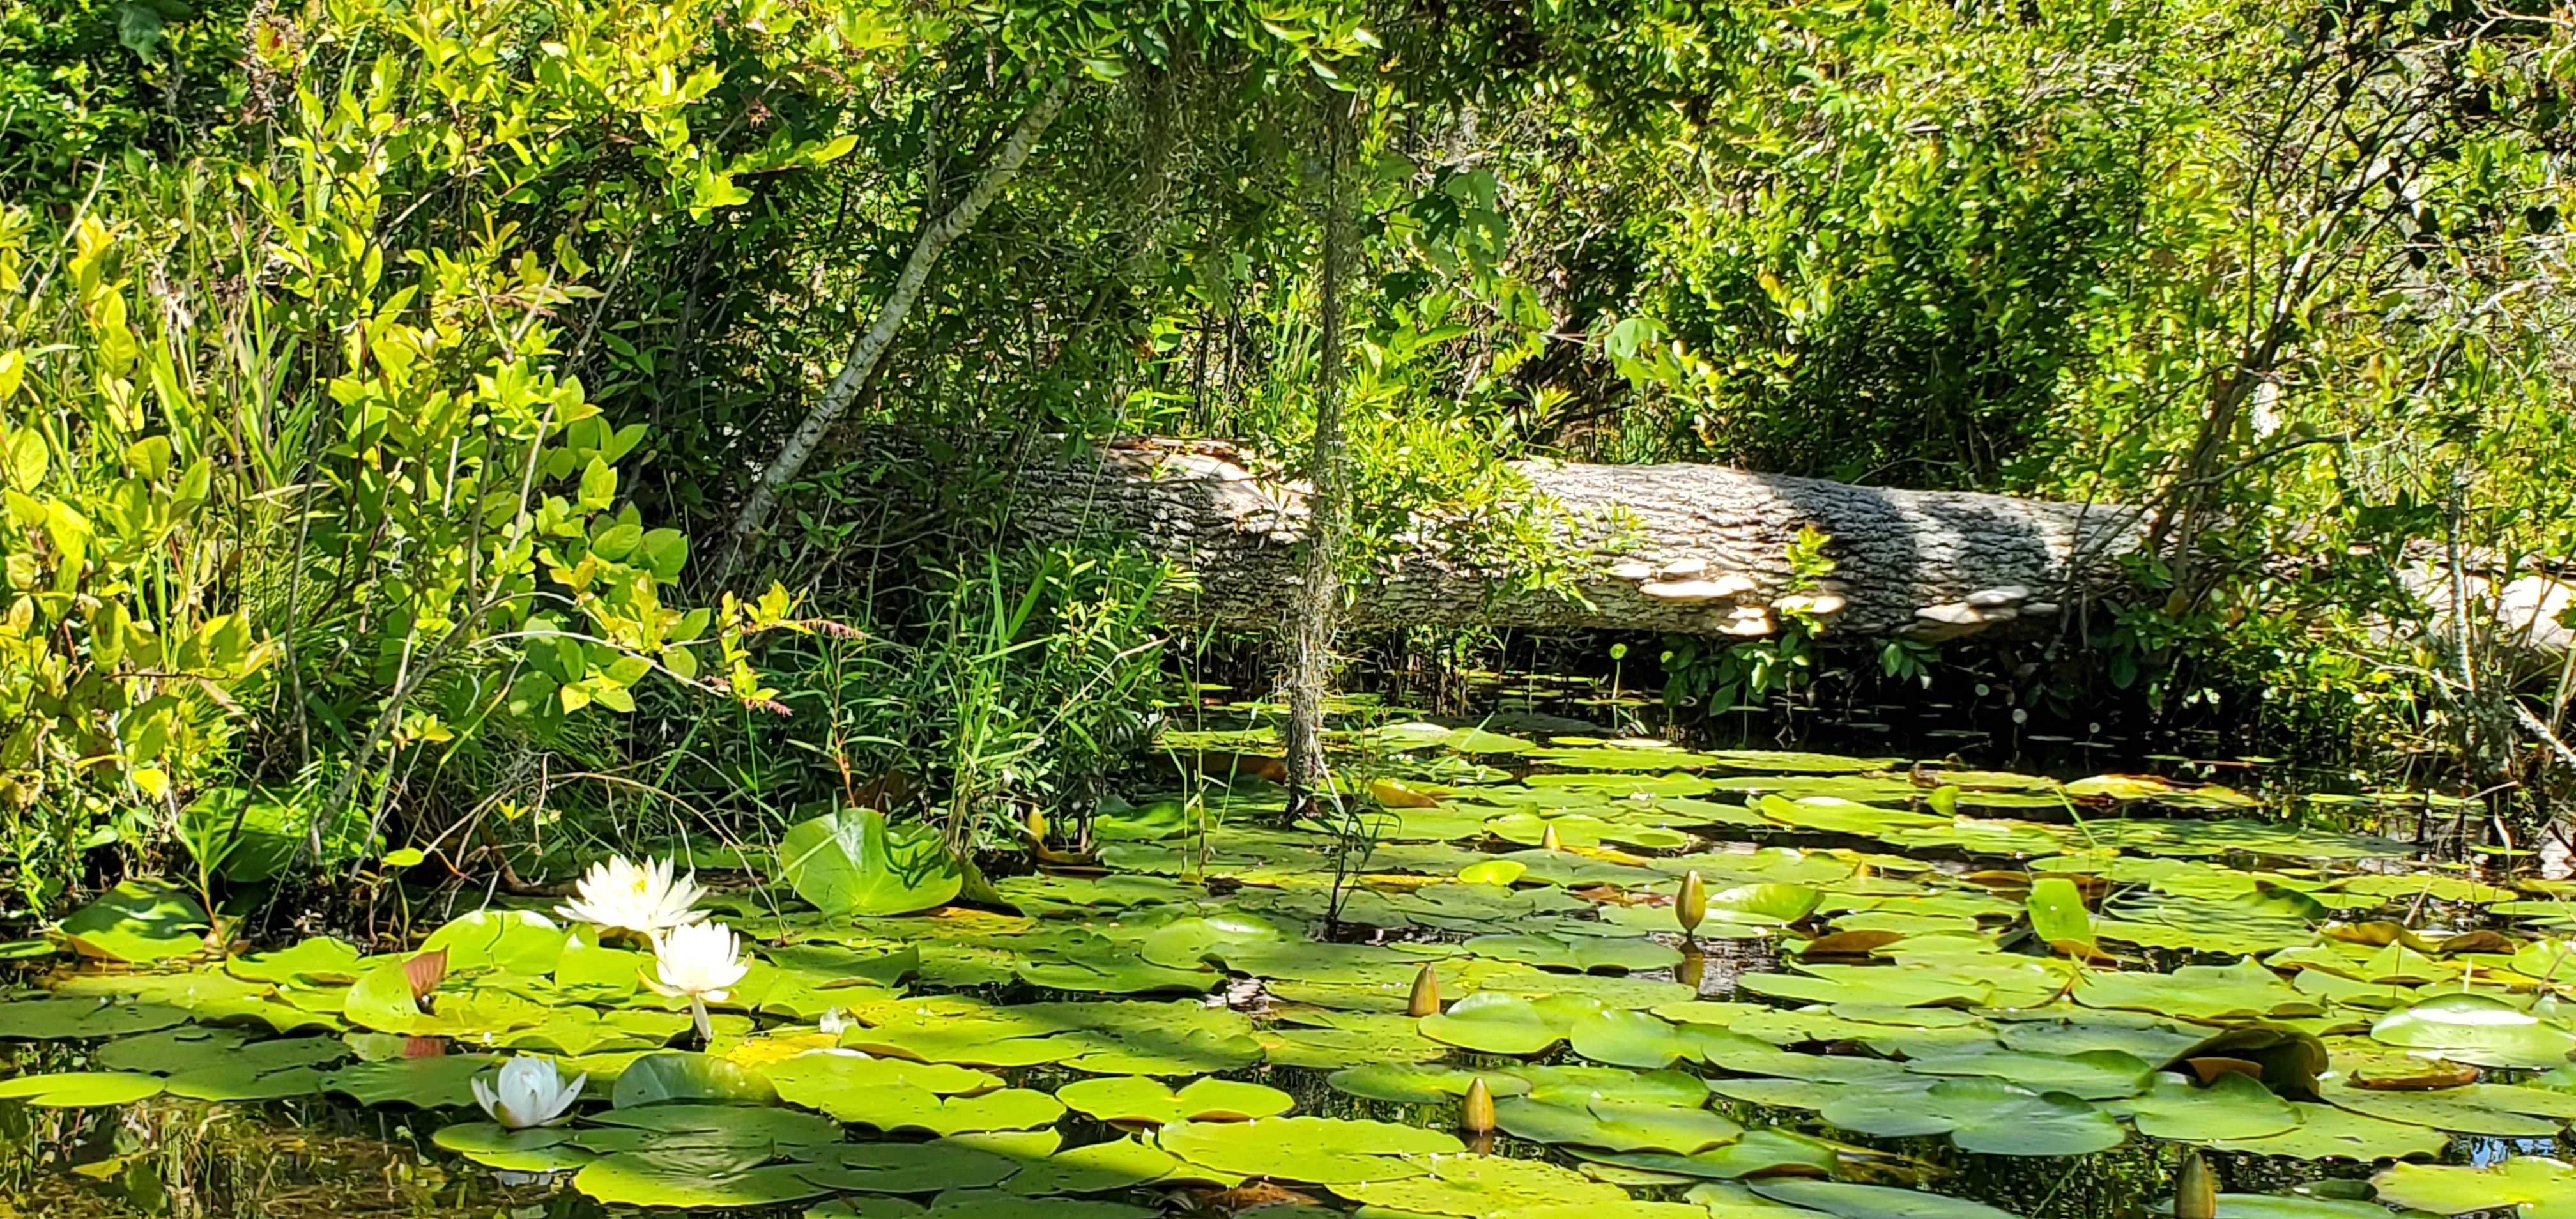 Log and lily pads